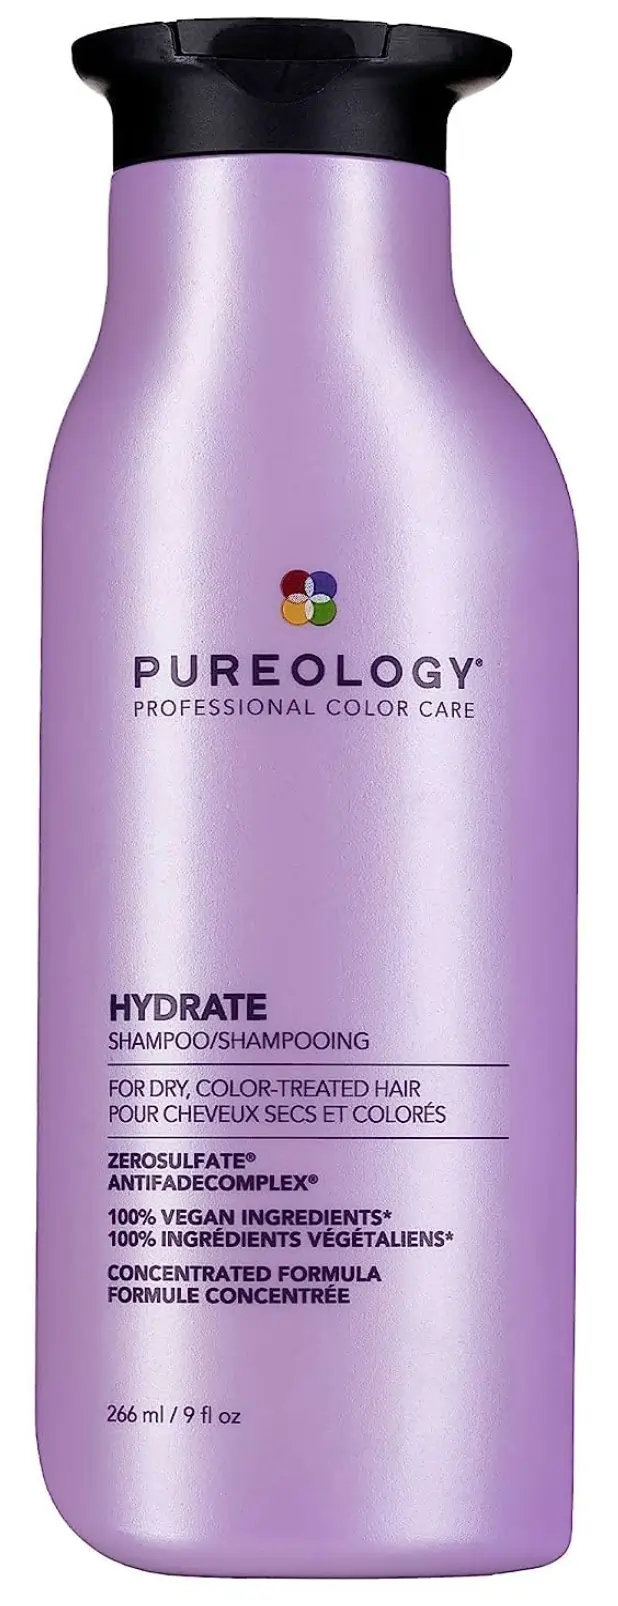 A tied FEMMENORDIC's choice in the Pureology vs Kerastase shampoo comparison, the Pureology Hydrate Shampoo.